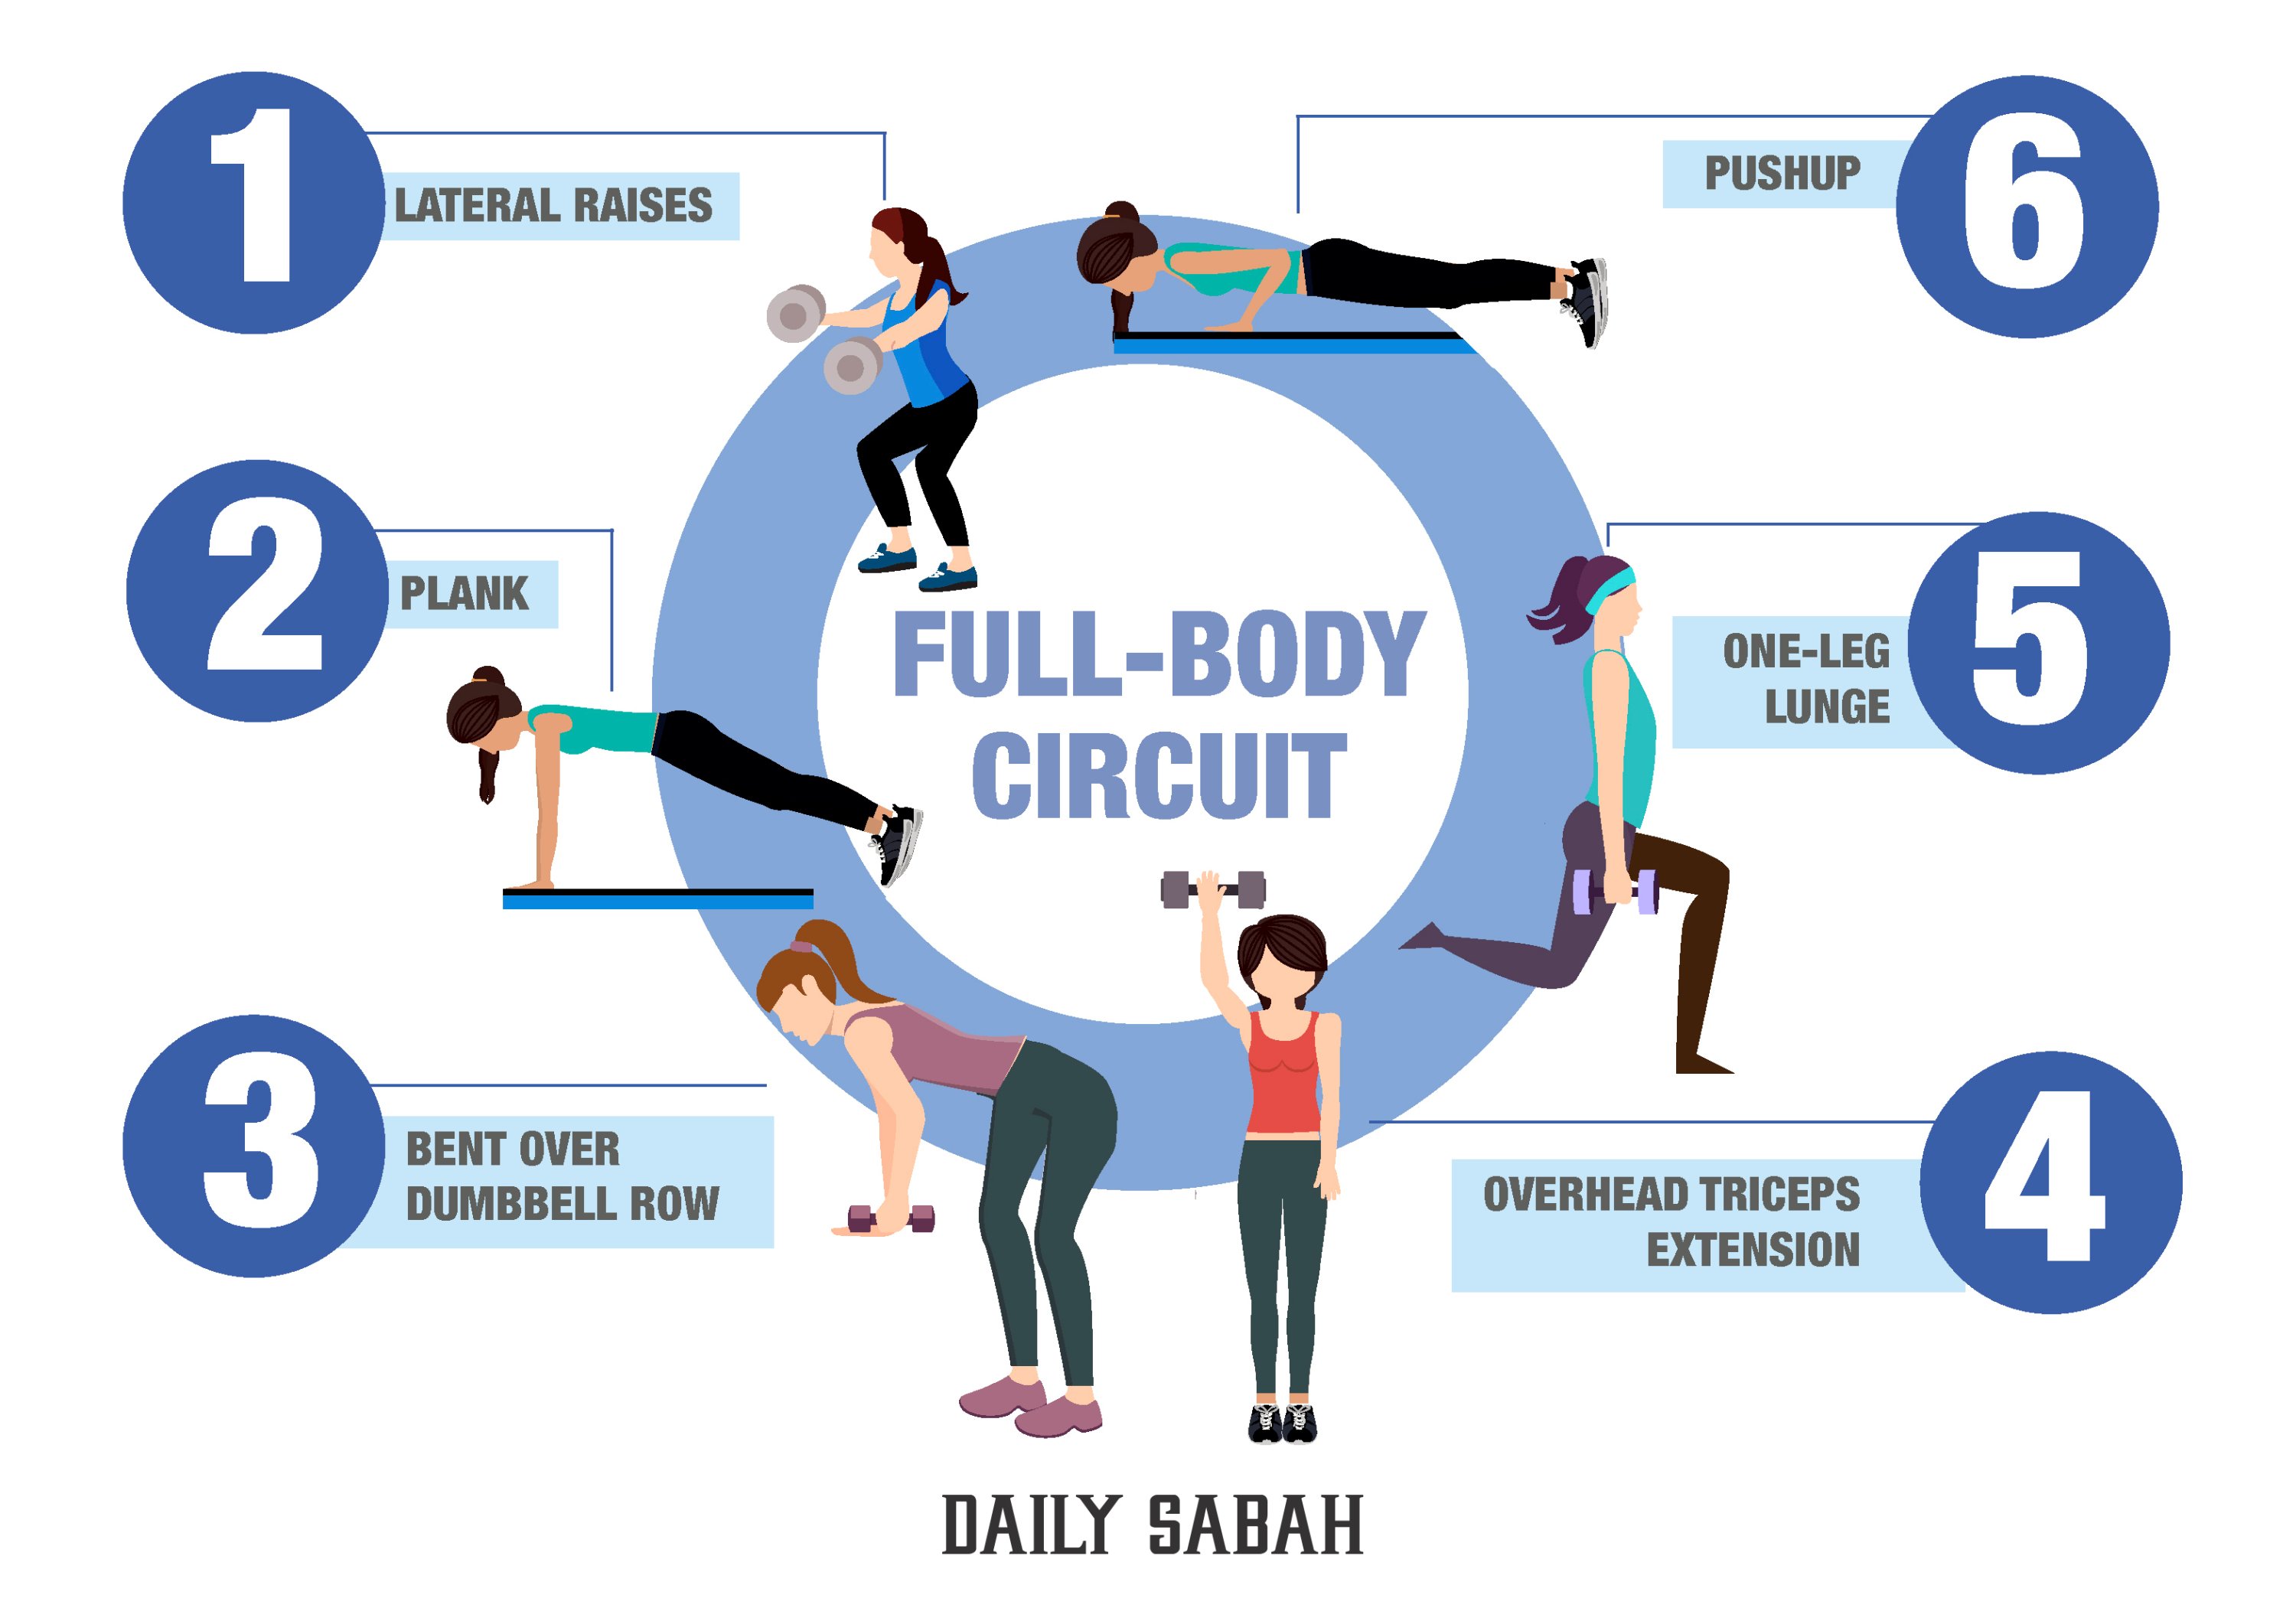 Self-isolation special: A full-body circuit workout you can do at home